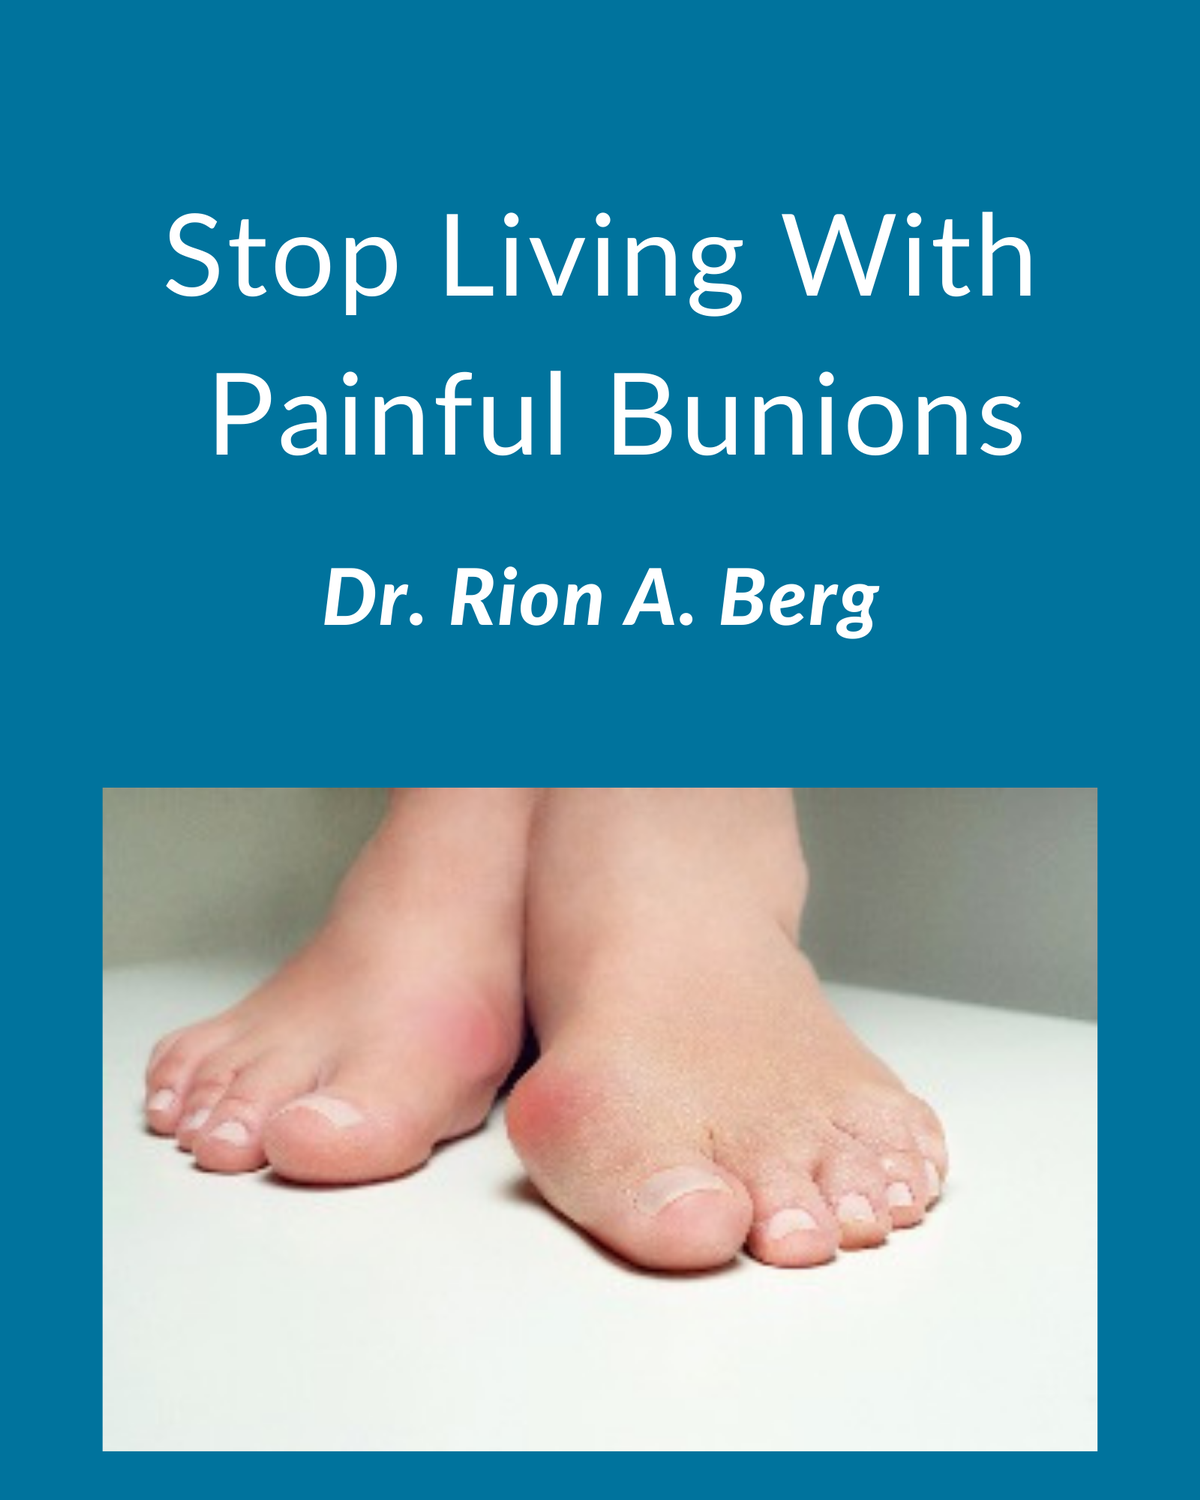 Stop Living With Painful Bunions in Seattle